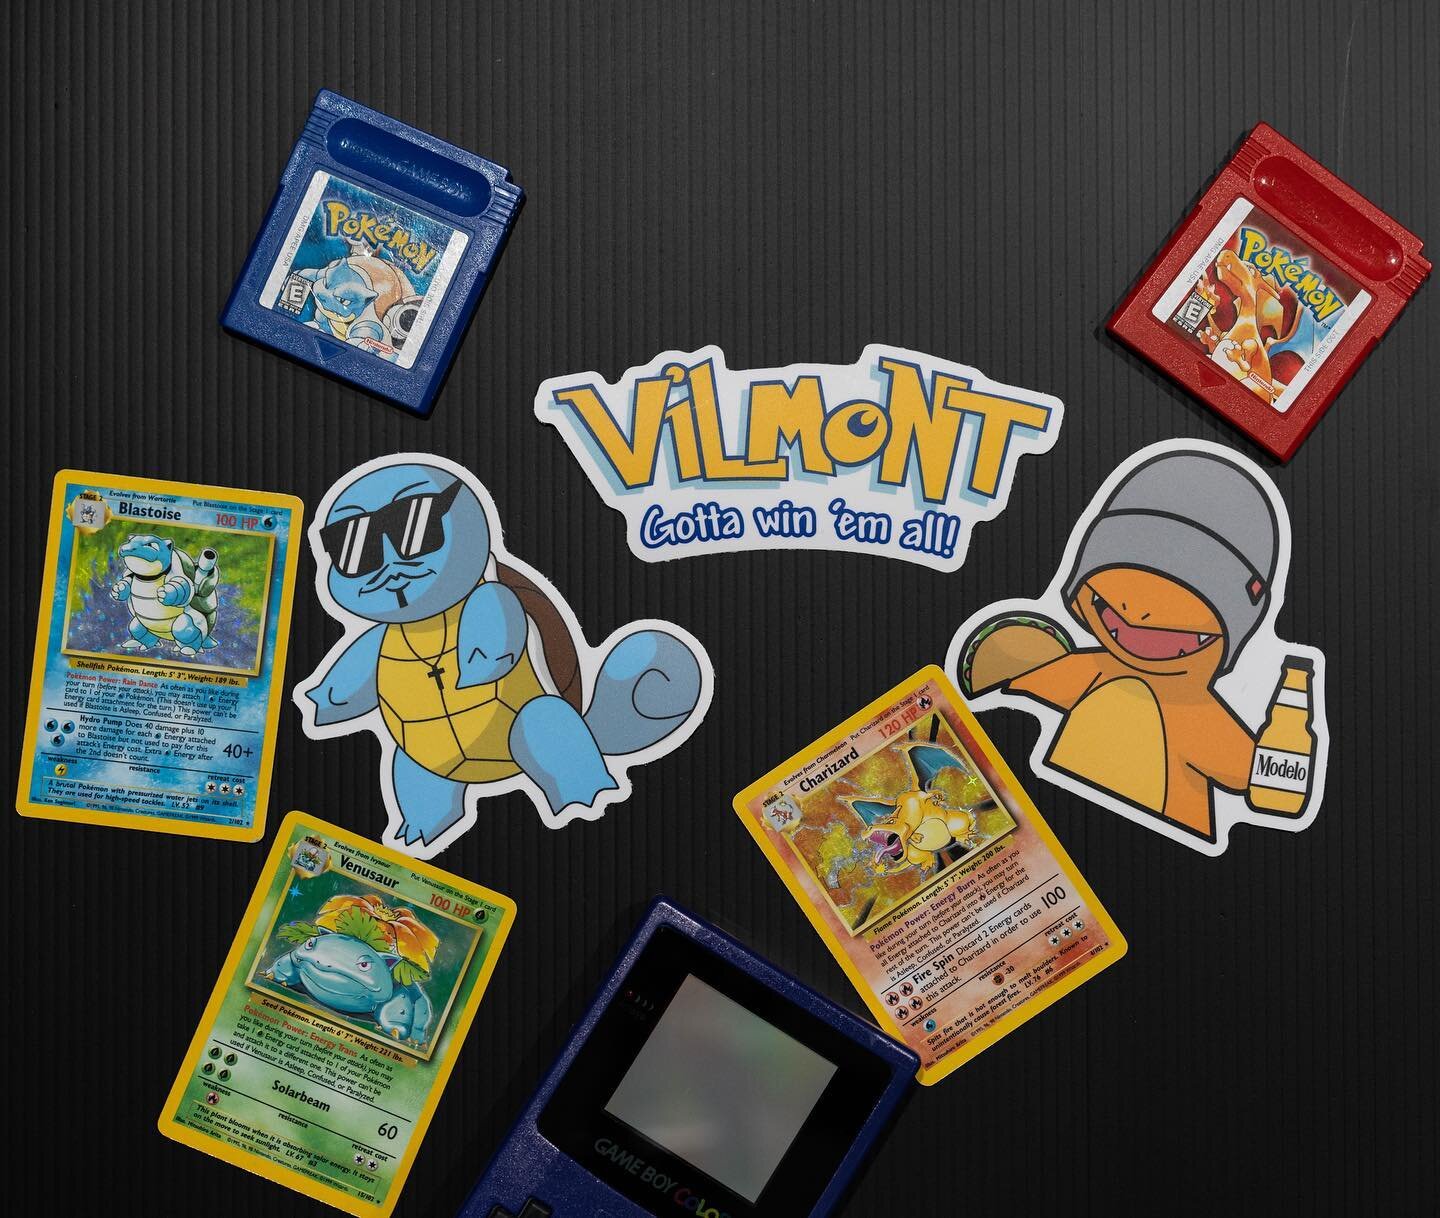 UPDATE: NOW AVAILABLE ONLY 45 packs!
-
Soon.
Thanks @thedecalgarage 
.
#pokemon #pokemonred #pokemonblue #vilmonthq #gameboycolor